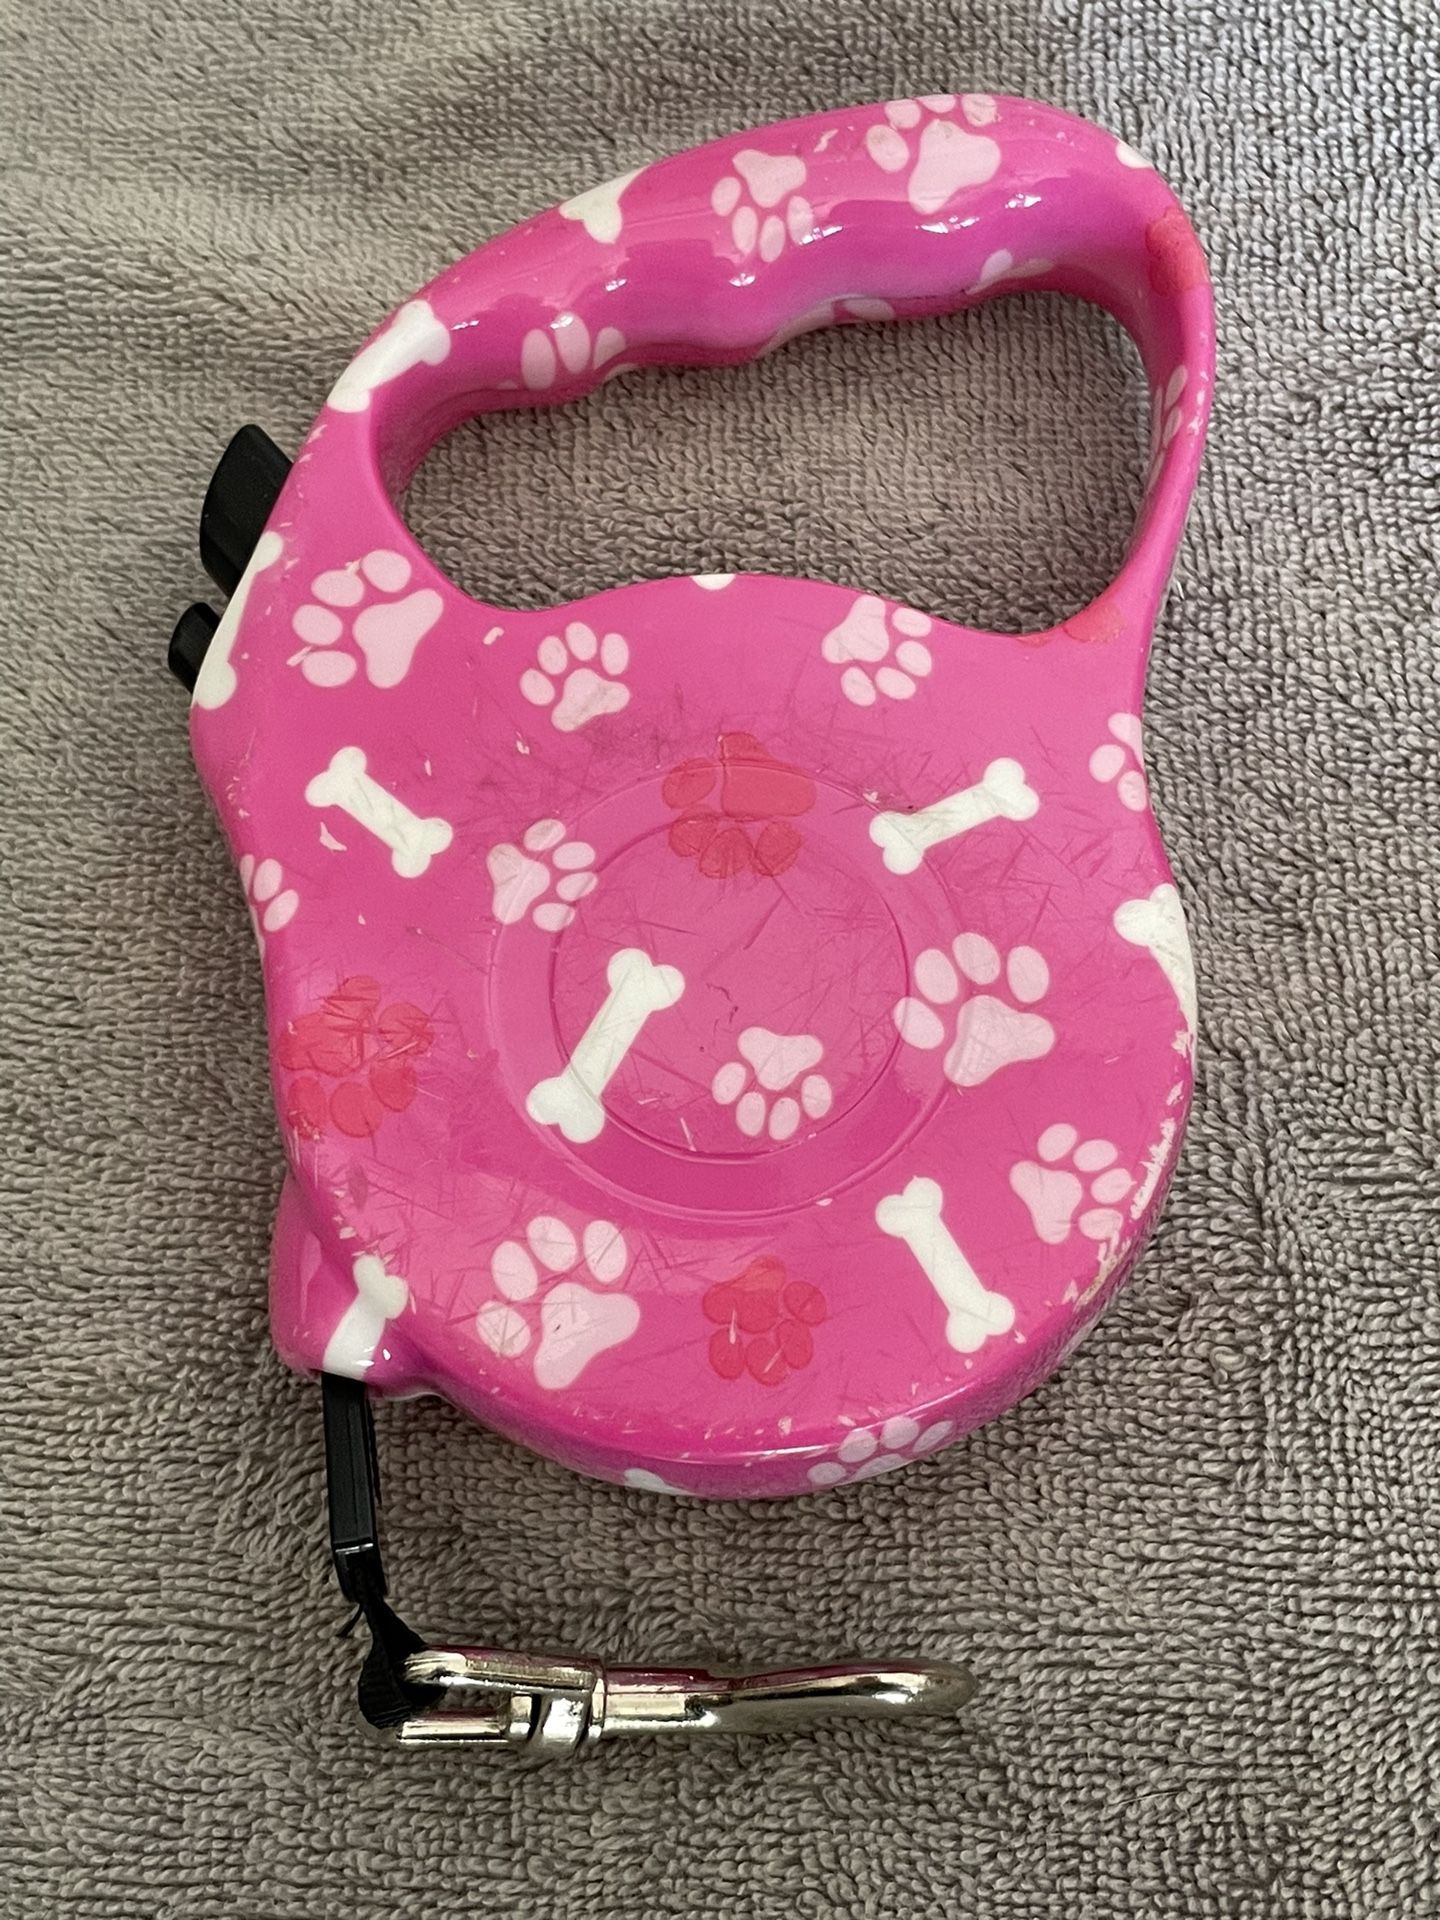 Retractable Leash 16ft Pink with bones & paw print